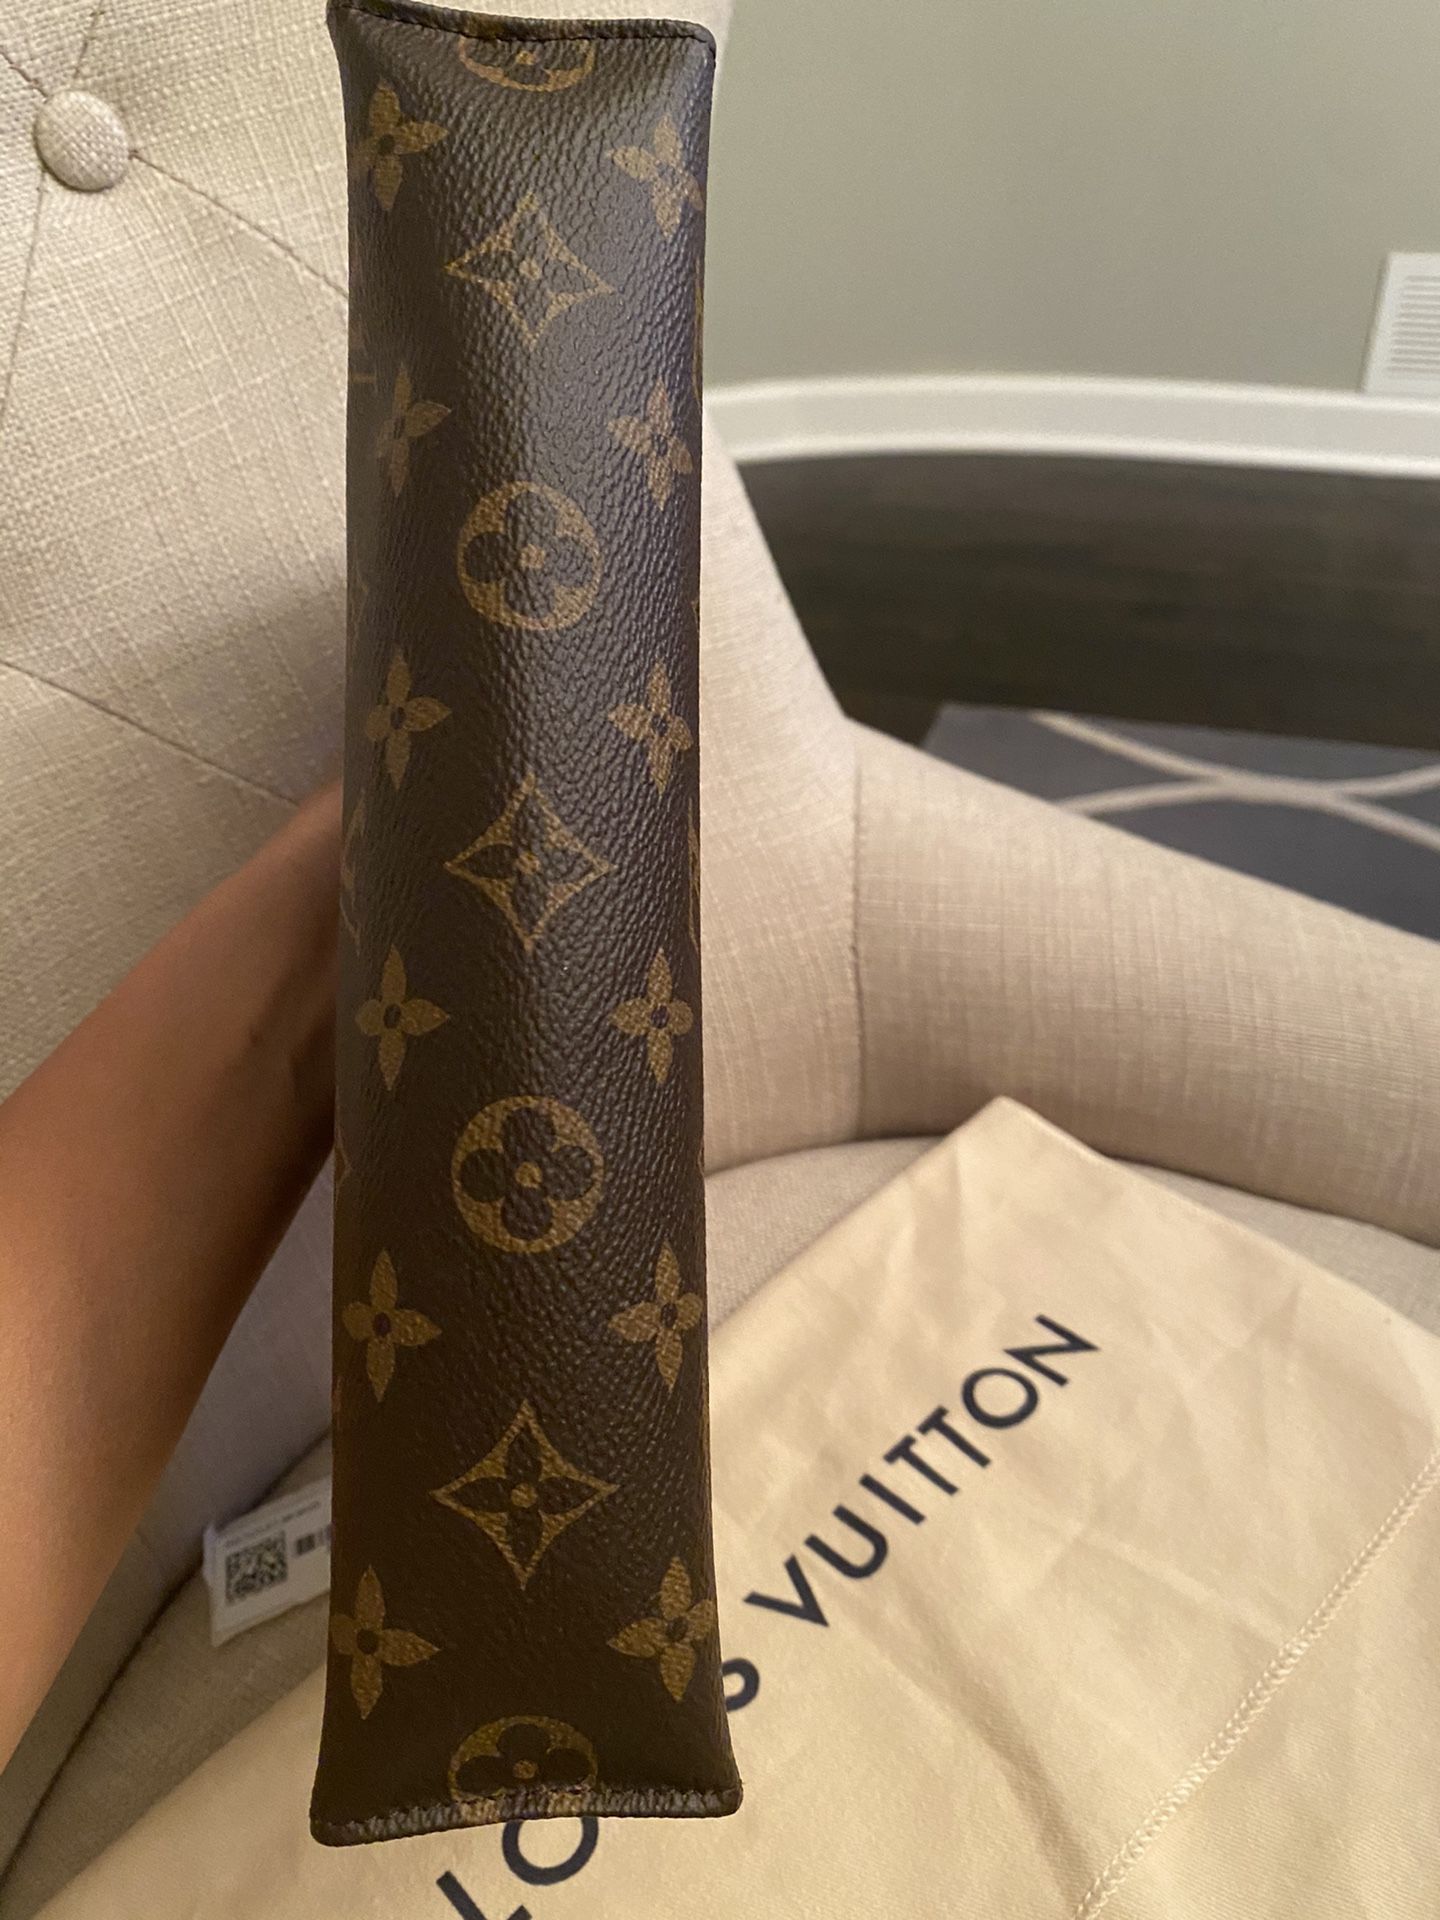 Louis Vuitton Pencil Case for Sale in Los Angeles, CA - OfferUp